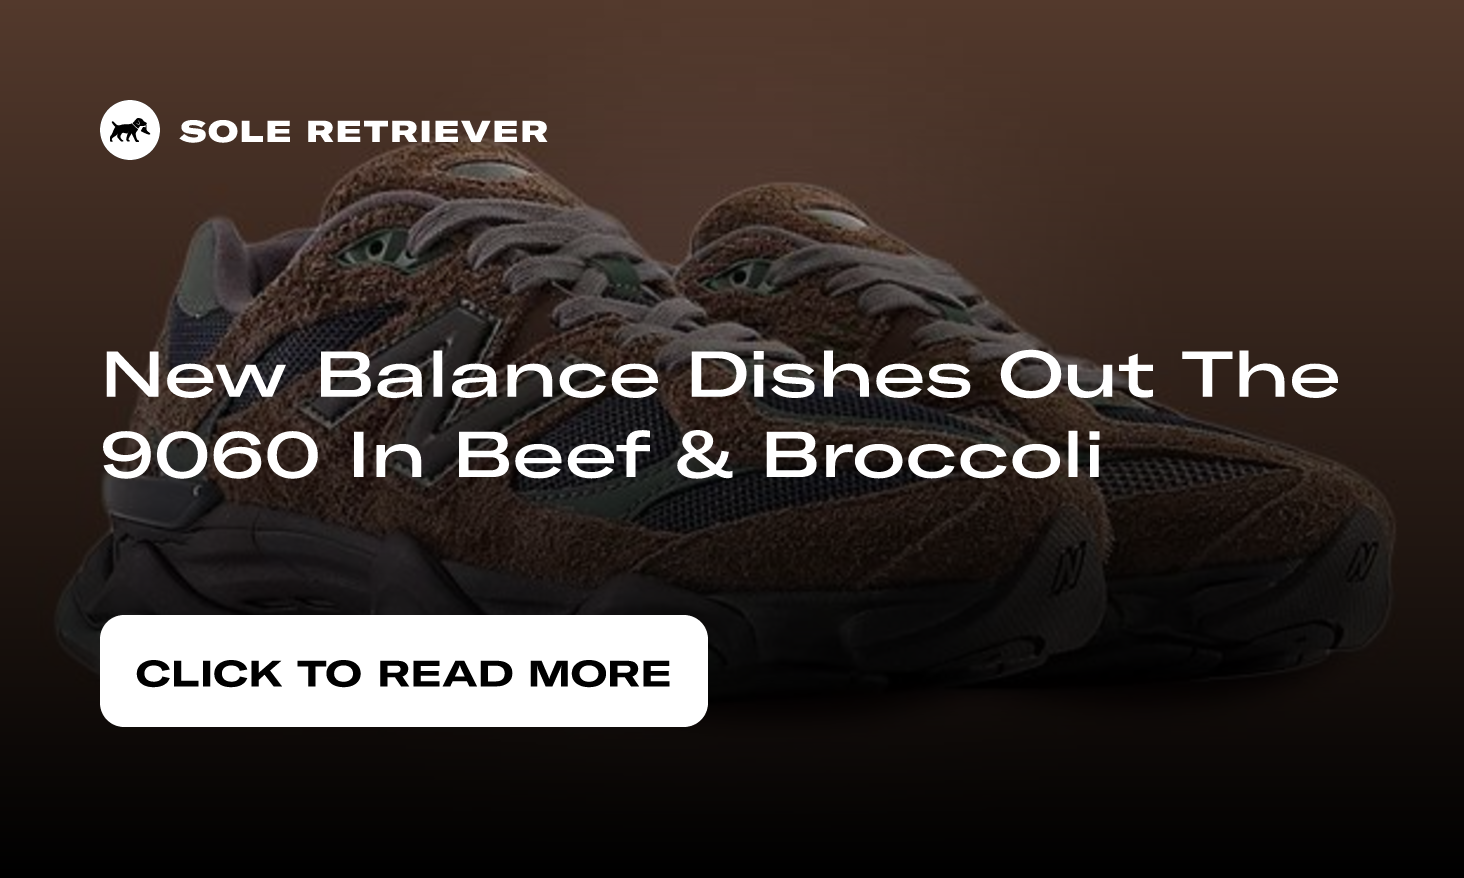 New Balance Dishes Out The 9060 In Beef & Broccoli